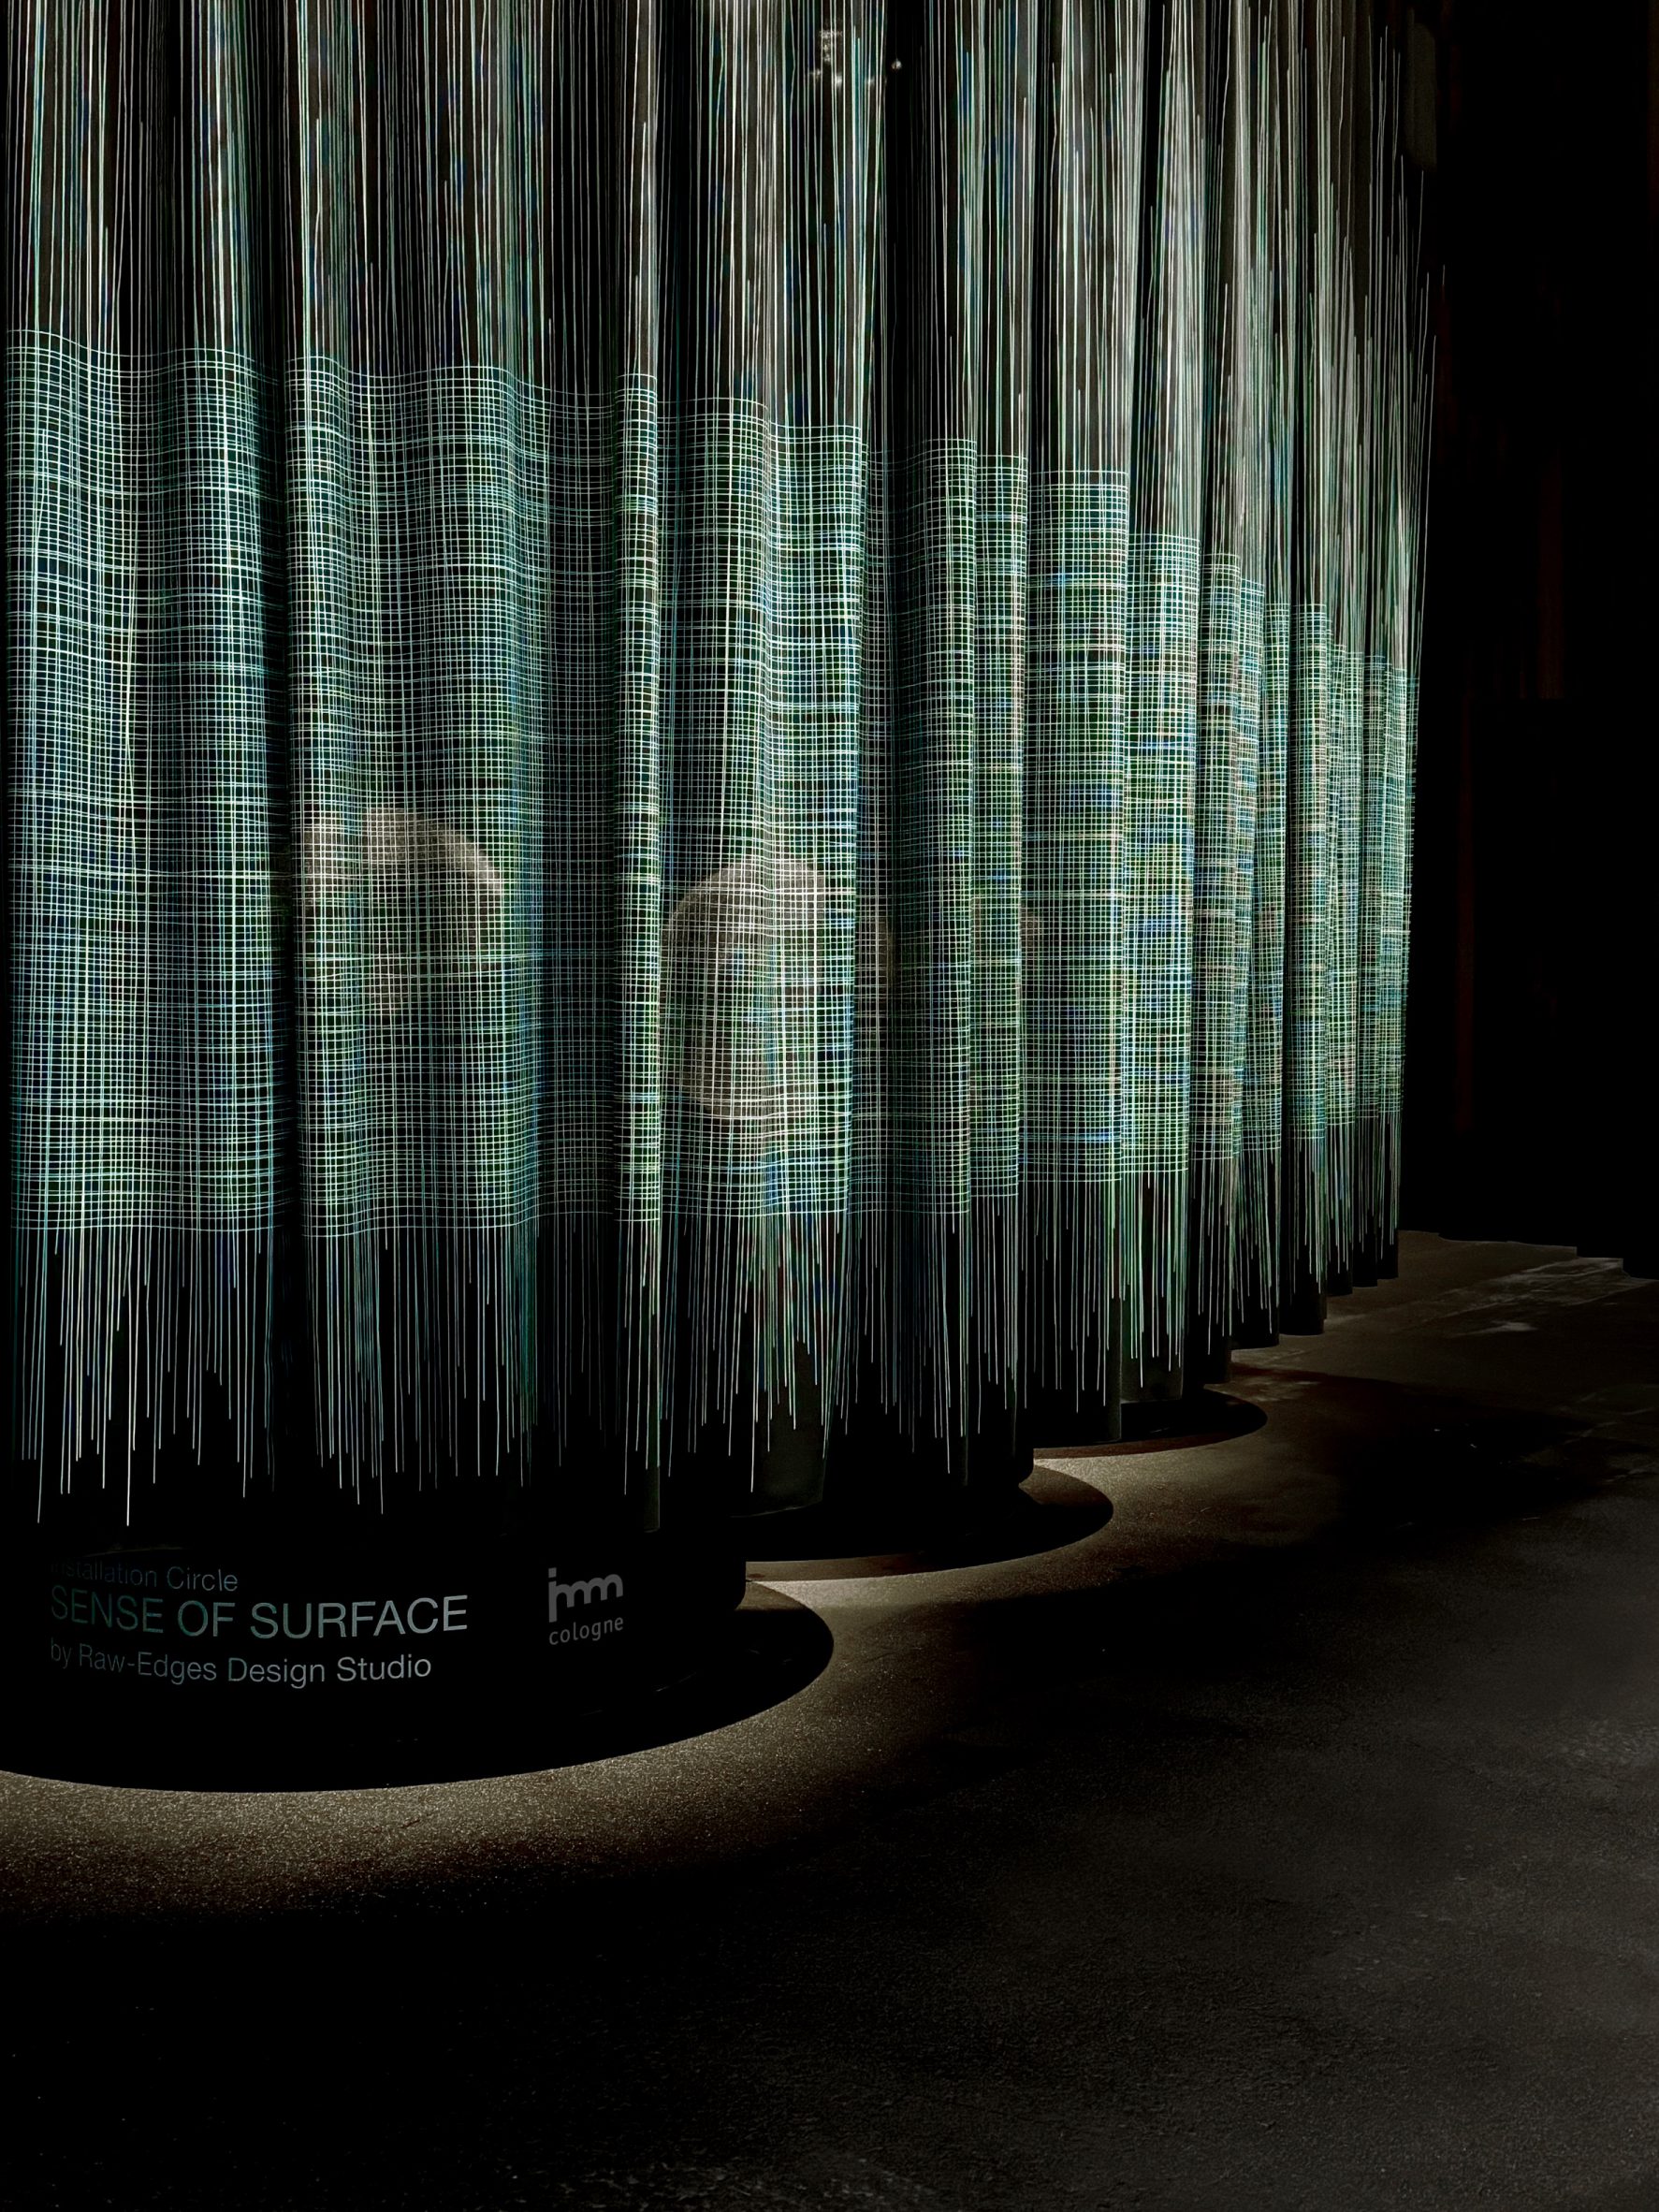 Curtain as part of the Sense of Surface installation featuring black and green patterns